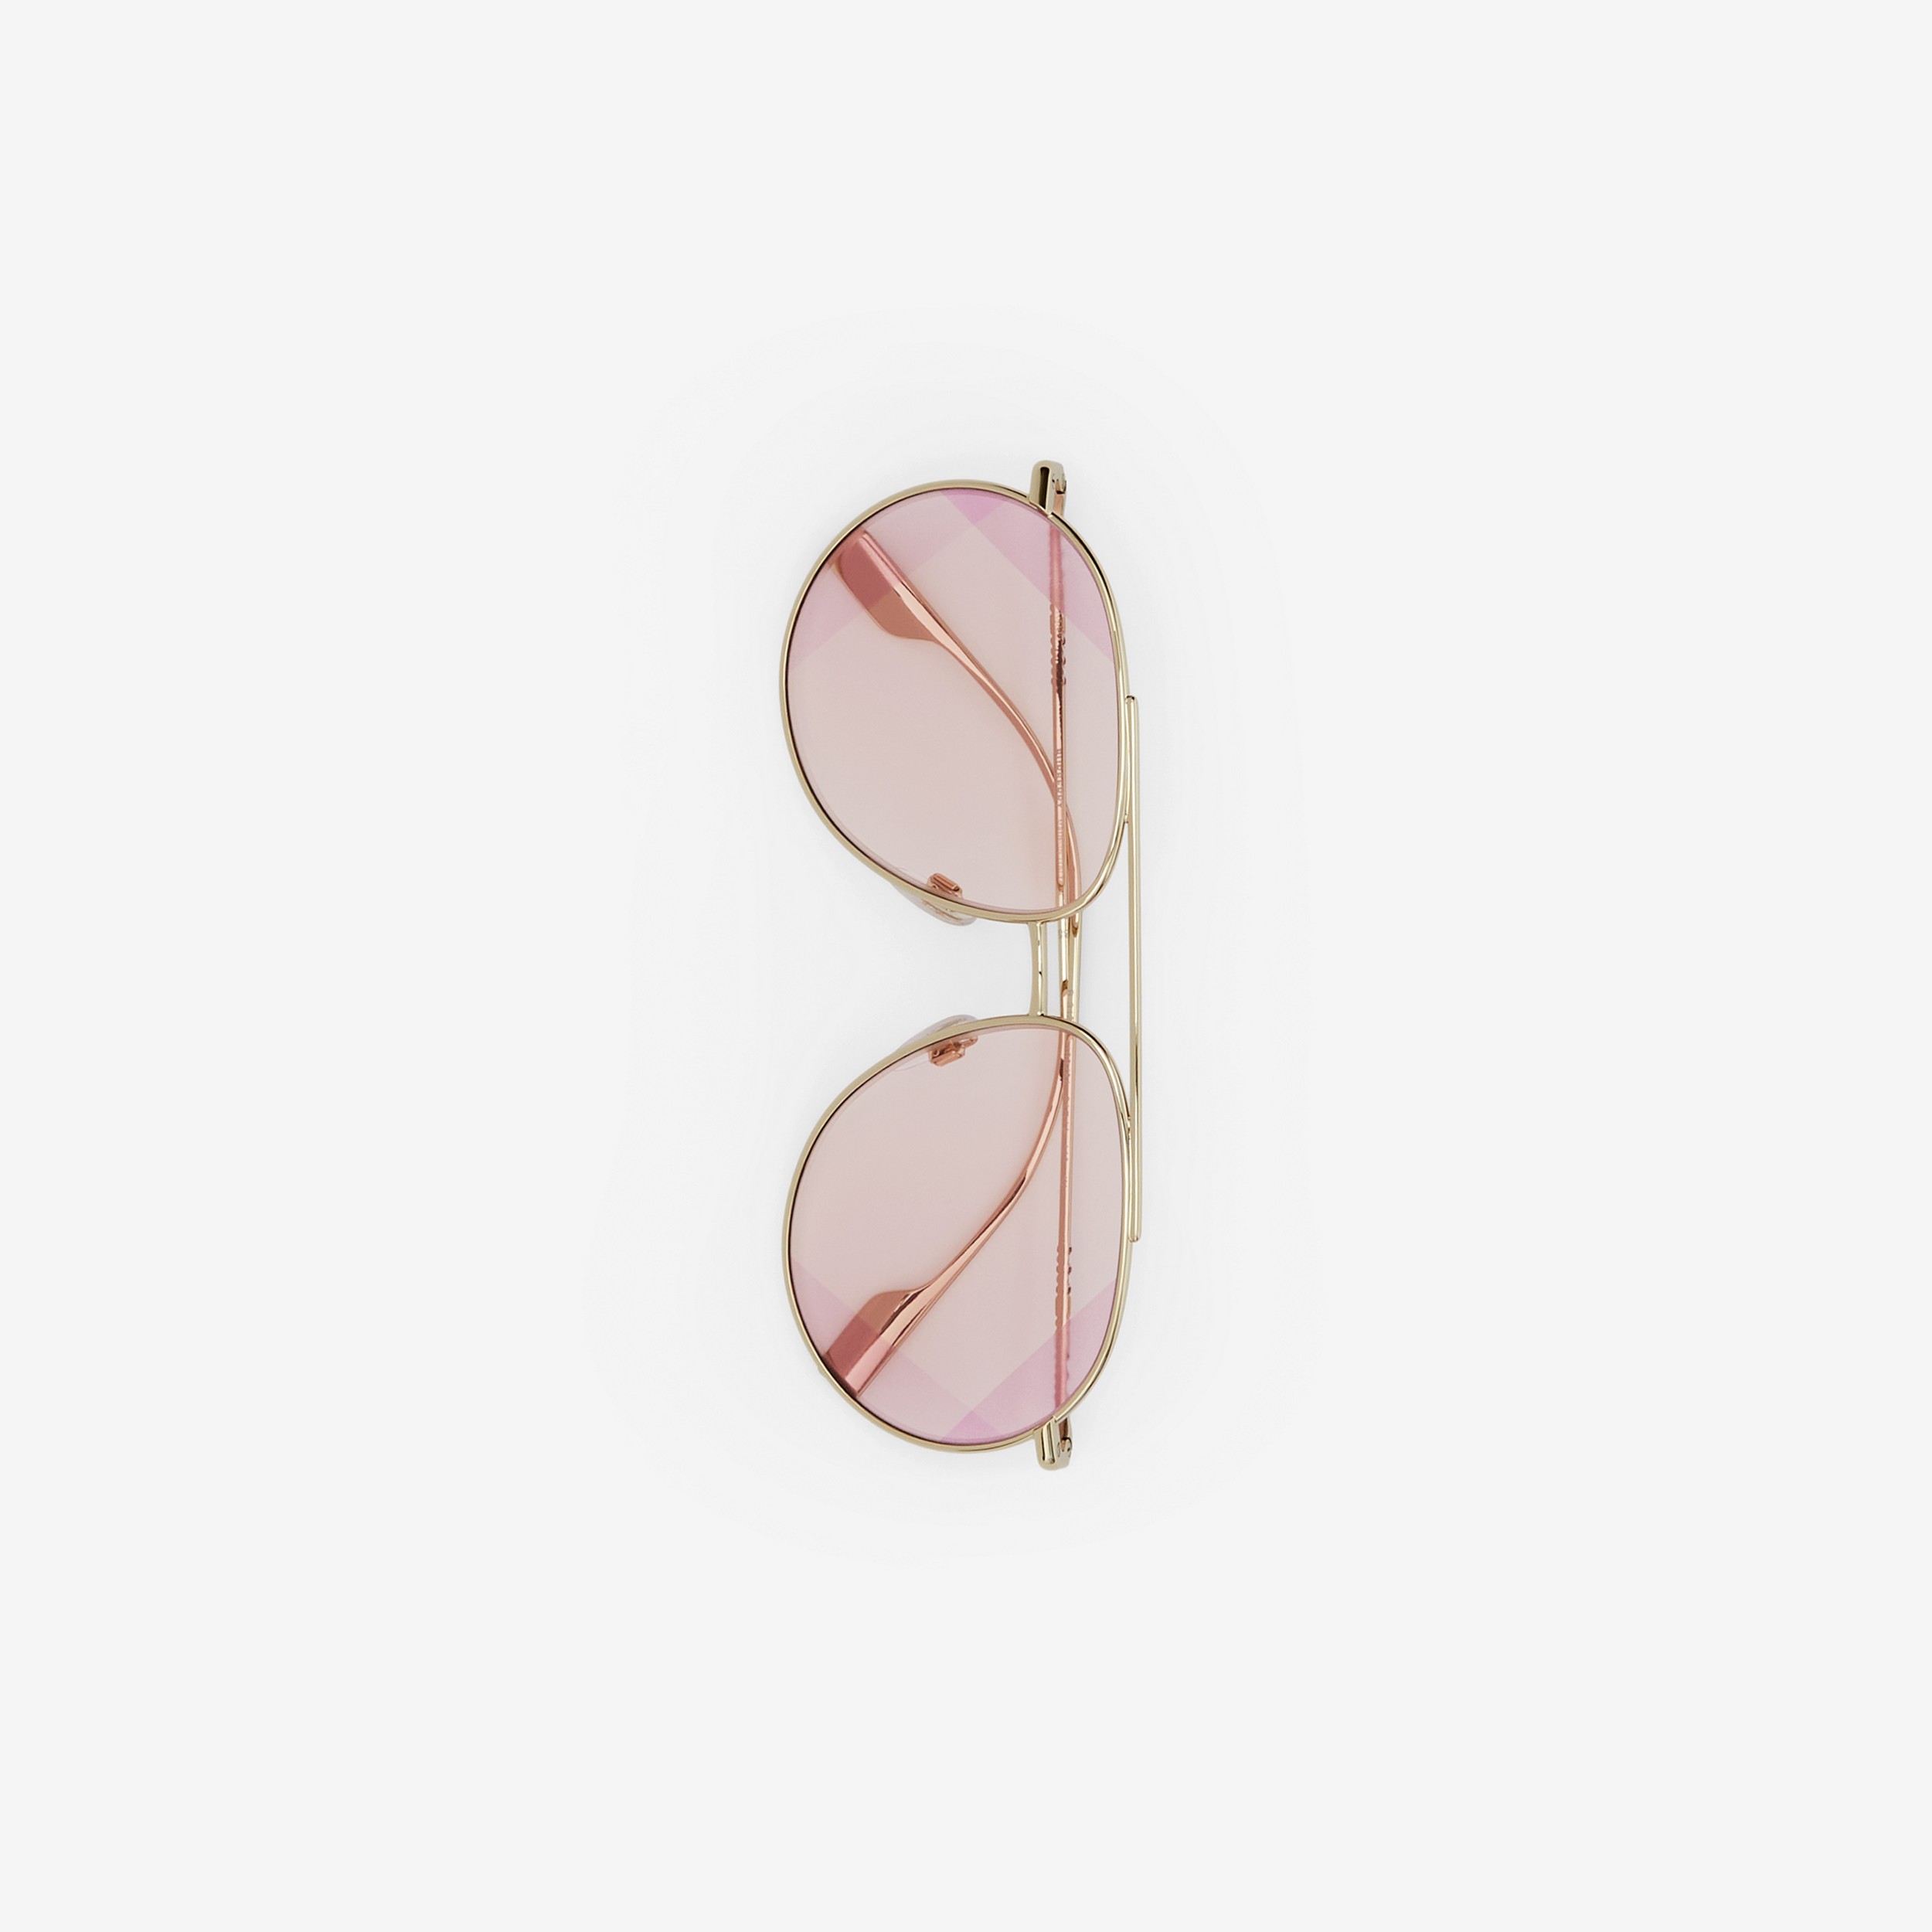 Icon Stripe Detail Oversized Pilot Sunglasses in Light Gold/pink - Women | Burberry® Official - 2